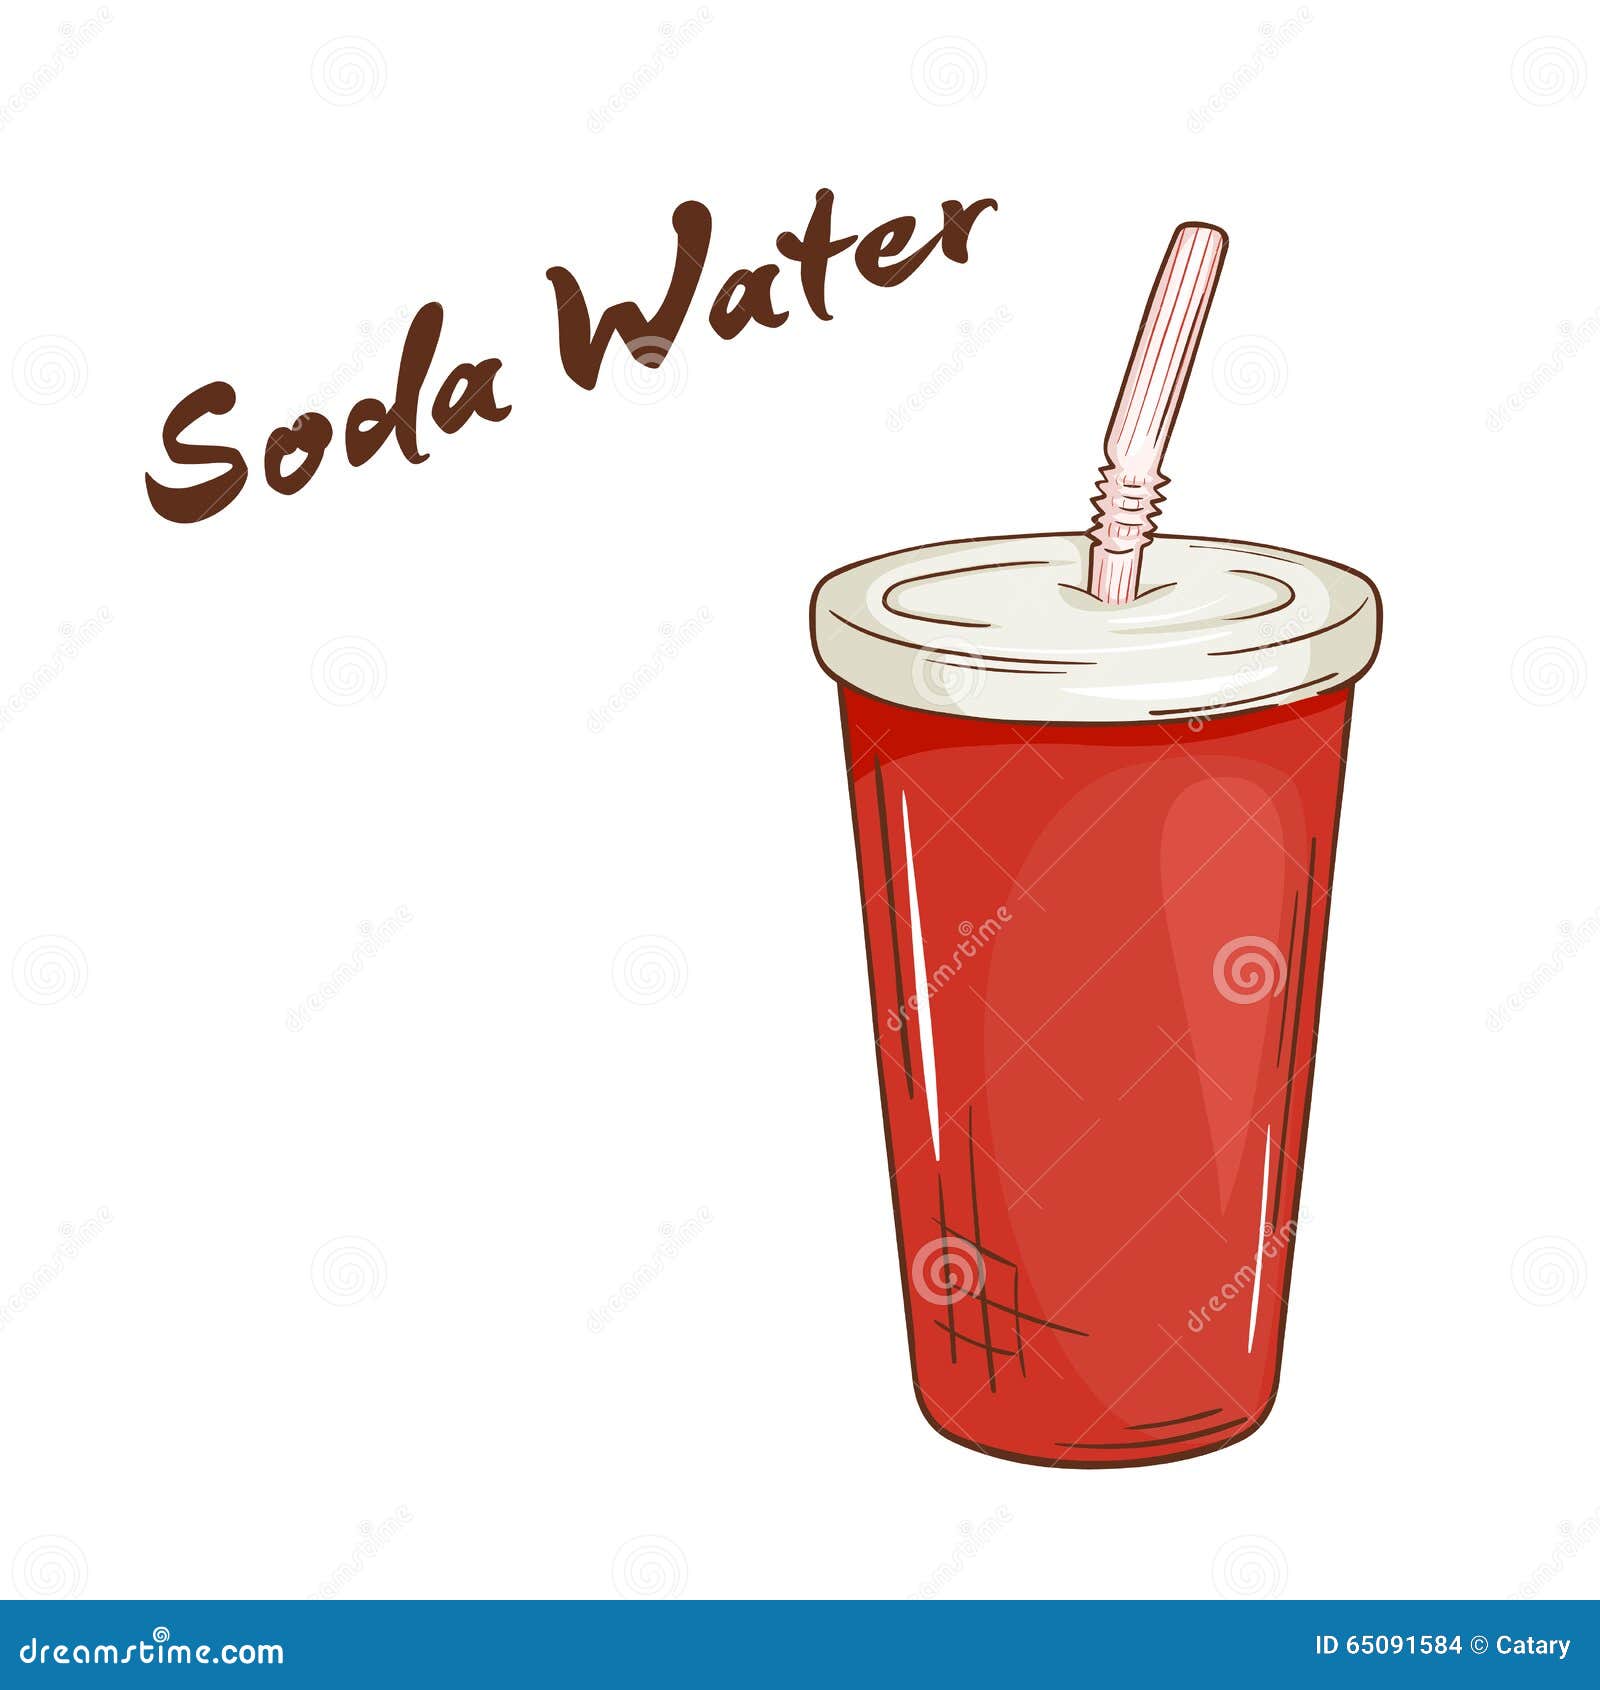 Glass of water with drinking straw hand drawing Vector Image